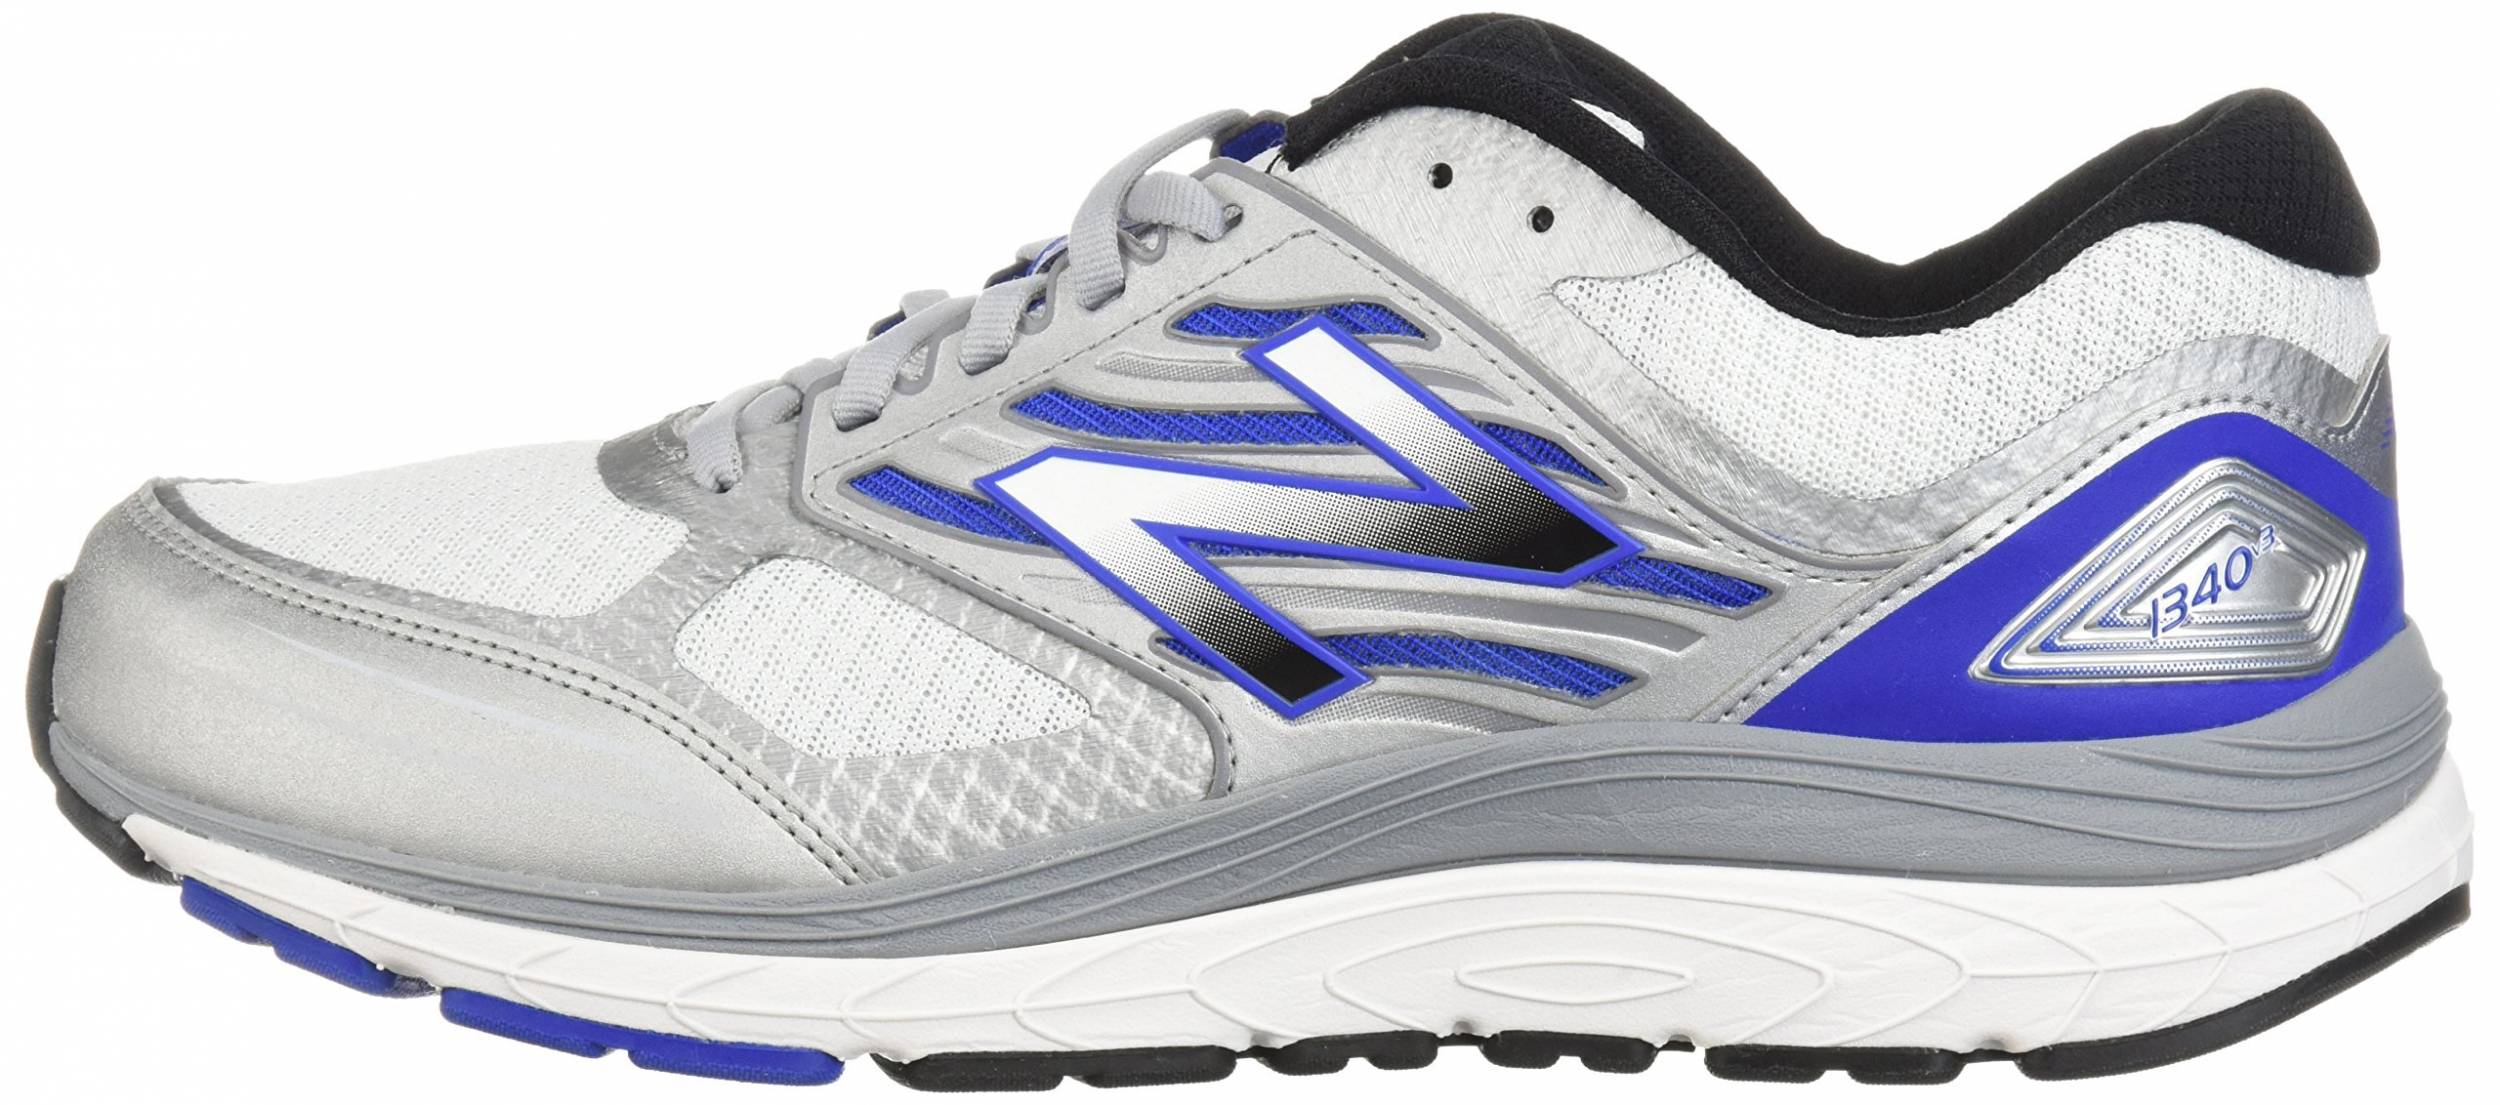 Furnace Peave kitchen New Balance 1340 v3 Review 2022, Facts, Deals ($100) | RunRepeat